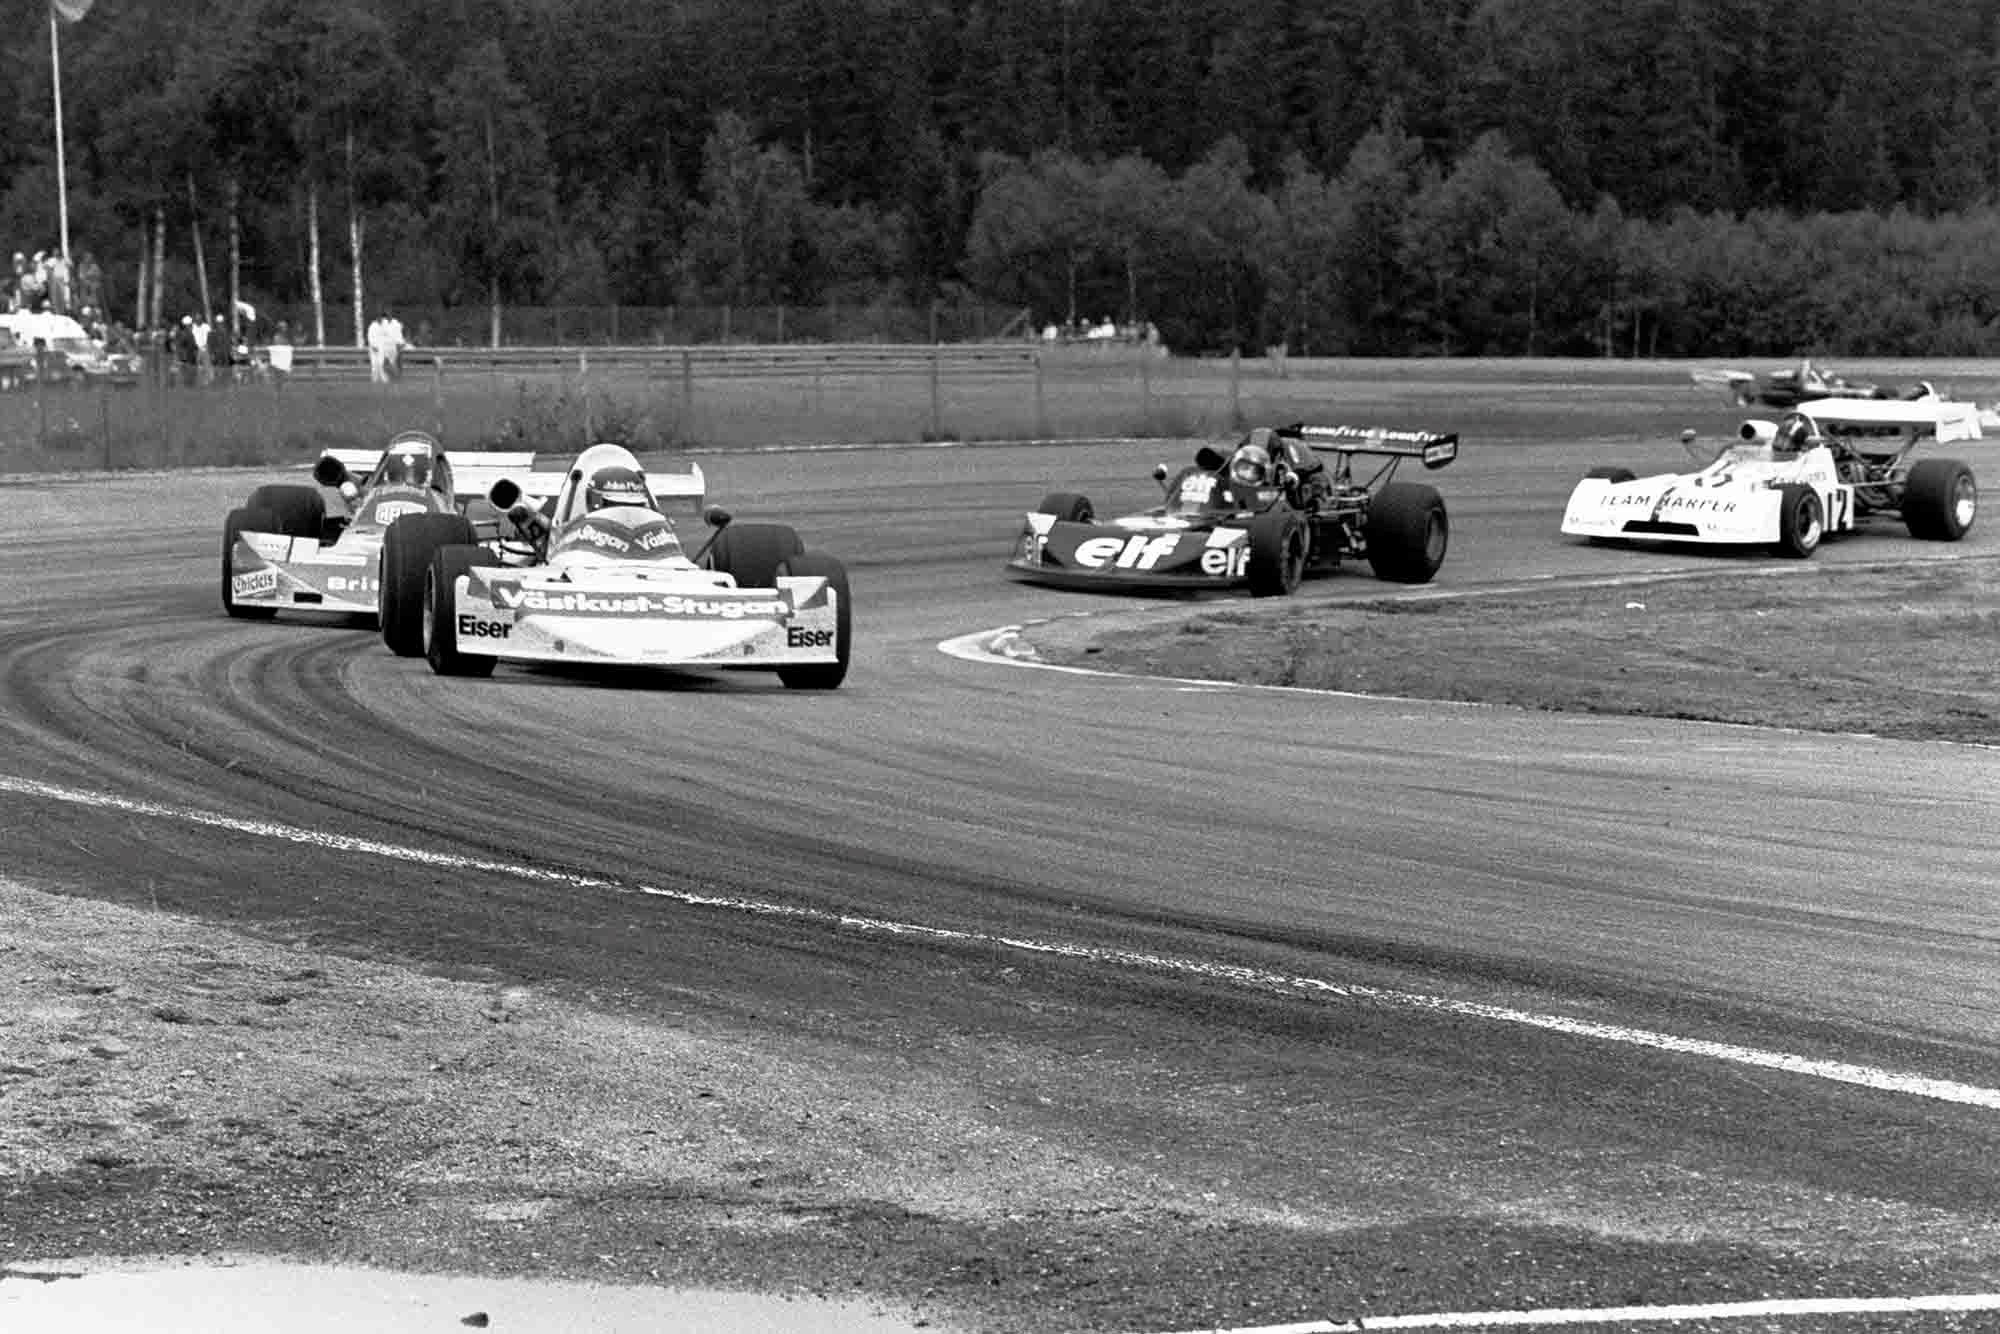 Beginning to make a name for himself, Purley follows the leading the pack Ronnie Peterson, Carlos Jarque and Patrick Depailler in F2 here at Anderstorp ’74. 